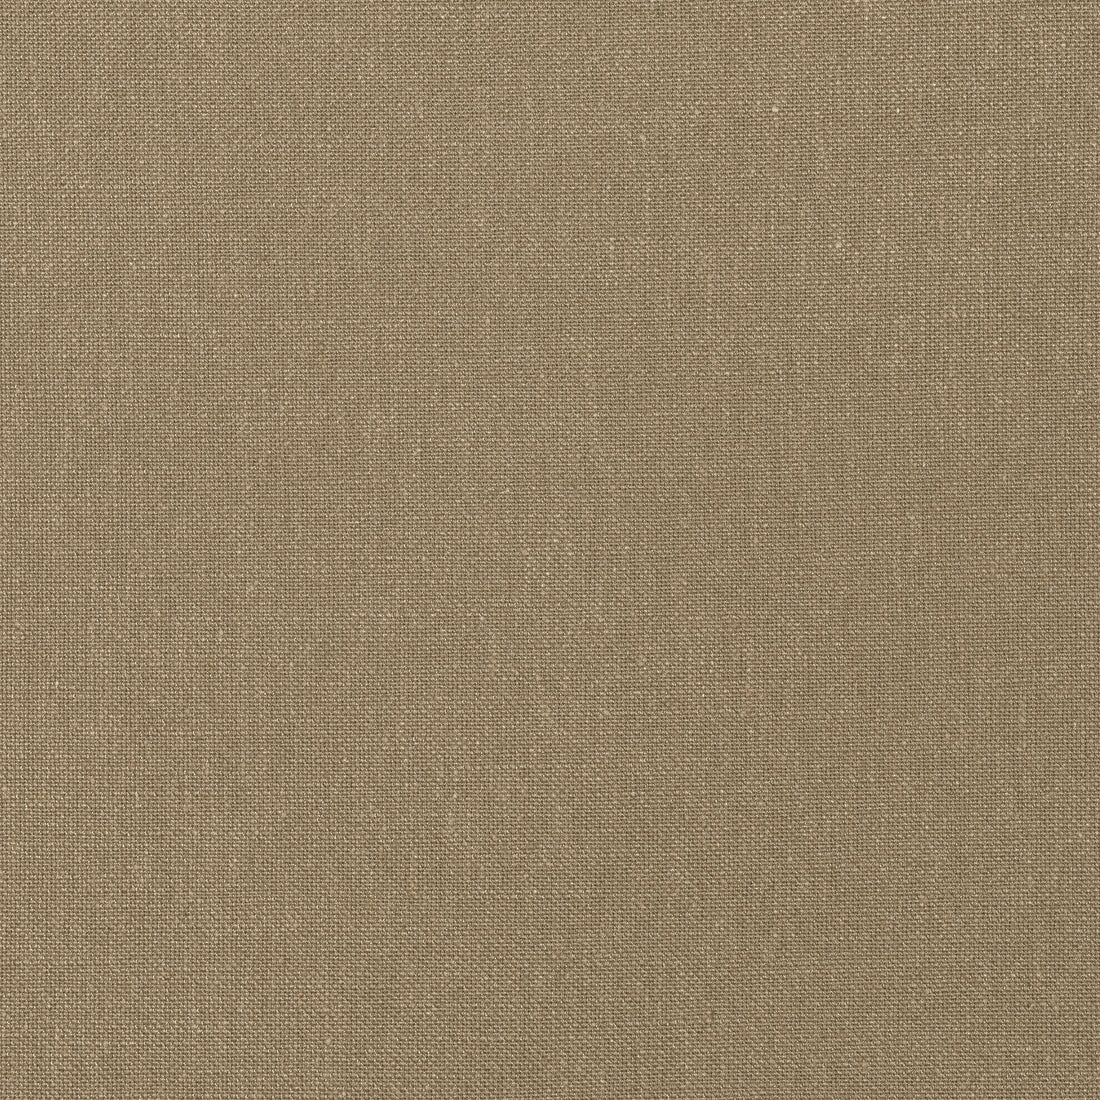 Palisade Linen fabric in taupe color - pattern number FWW7660 - by Thibaut in the Palisades collection